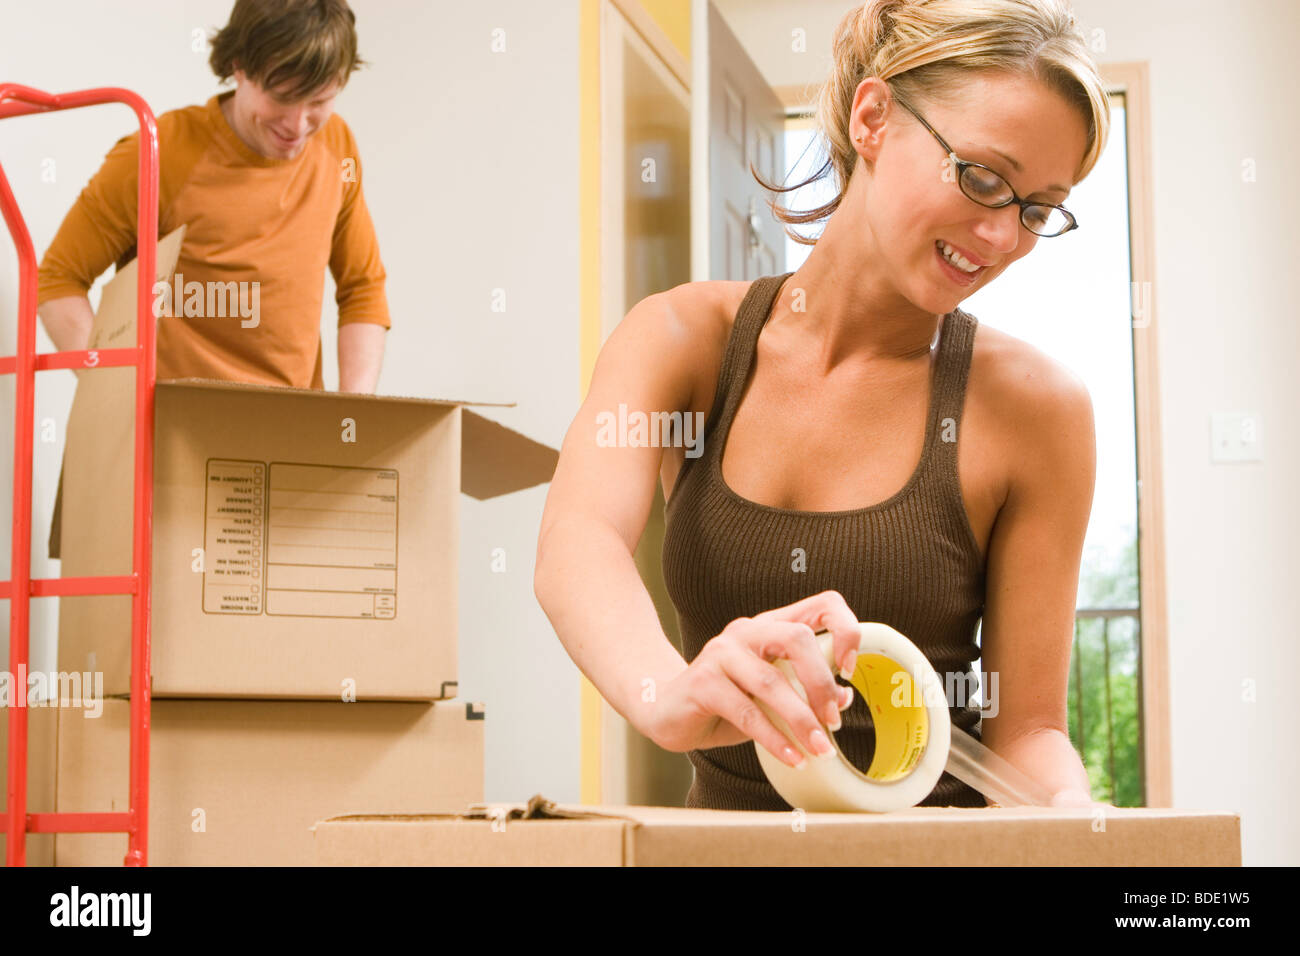 Couple moving and packing. Stock Photo